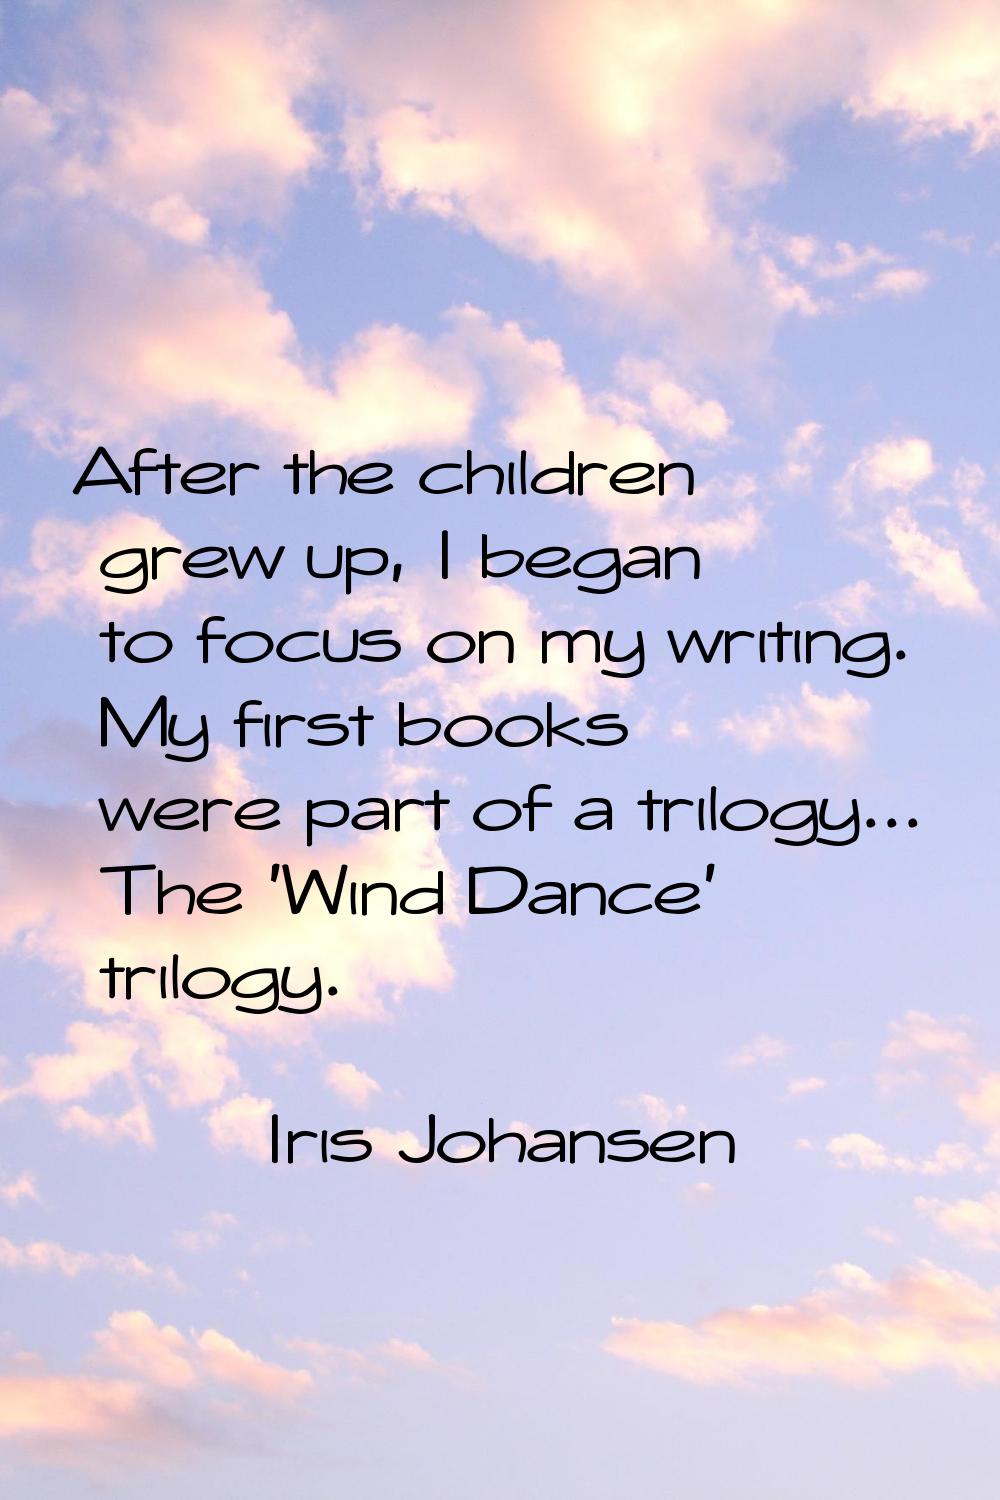 After the children grew up, I began to focus on my writing. My first books were part of a trilogy..